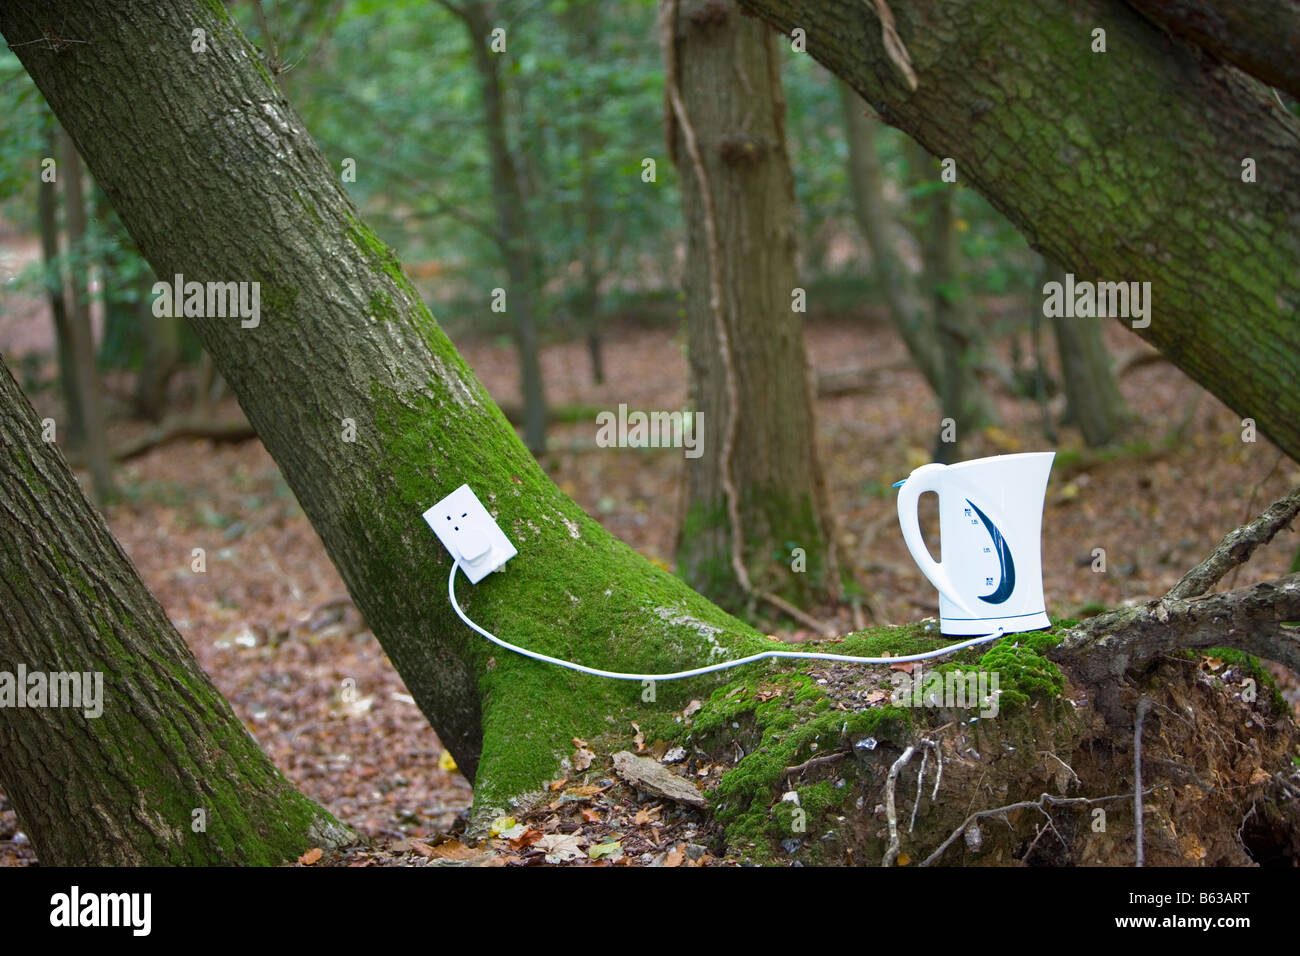 Electrical outlet and kettle on tree in forest Stock Photo